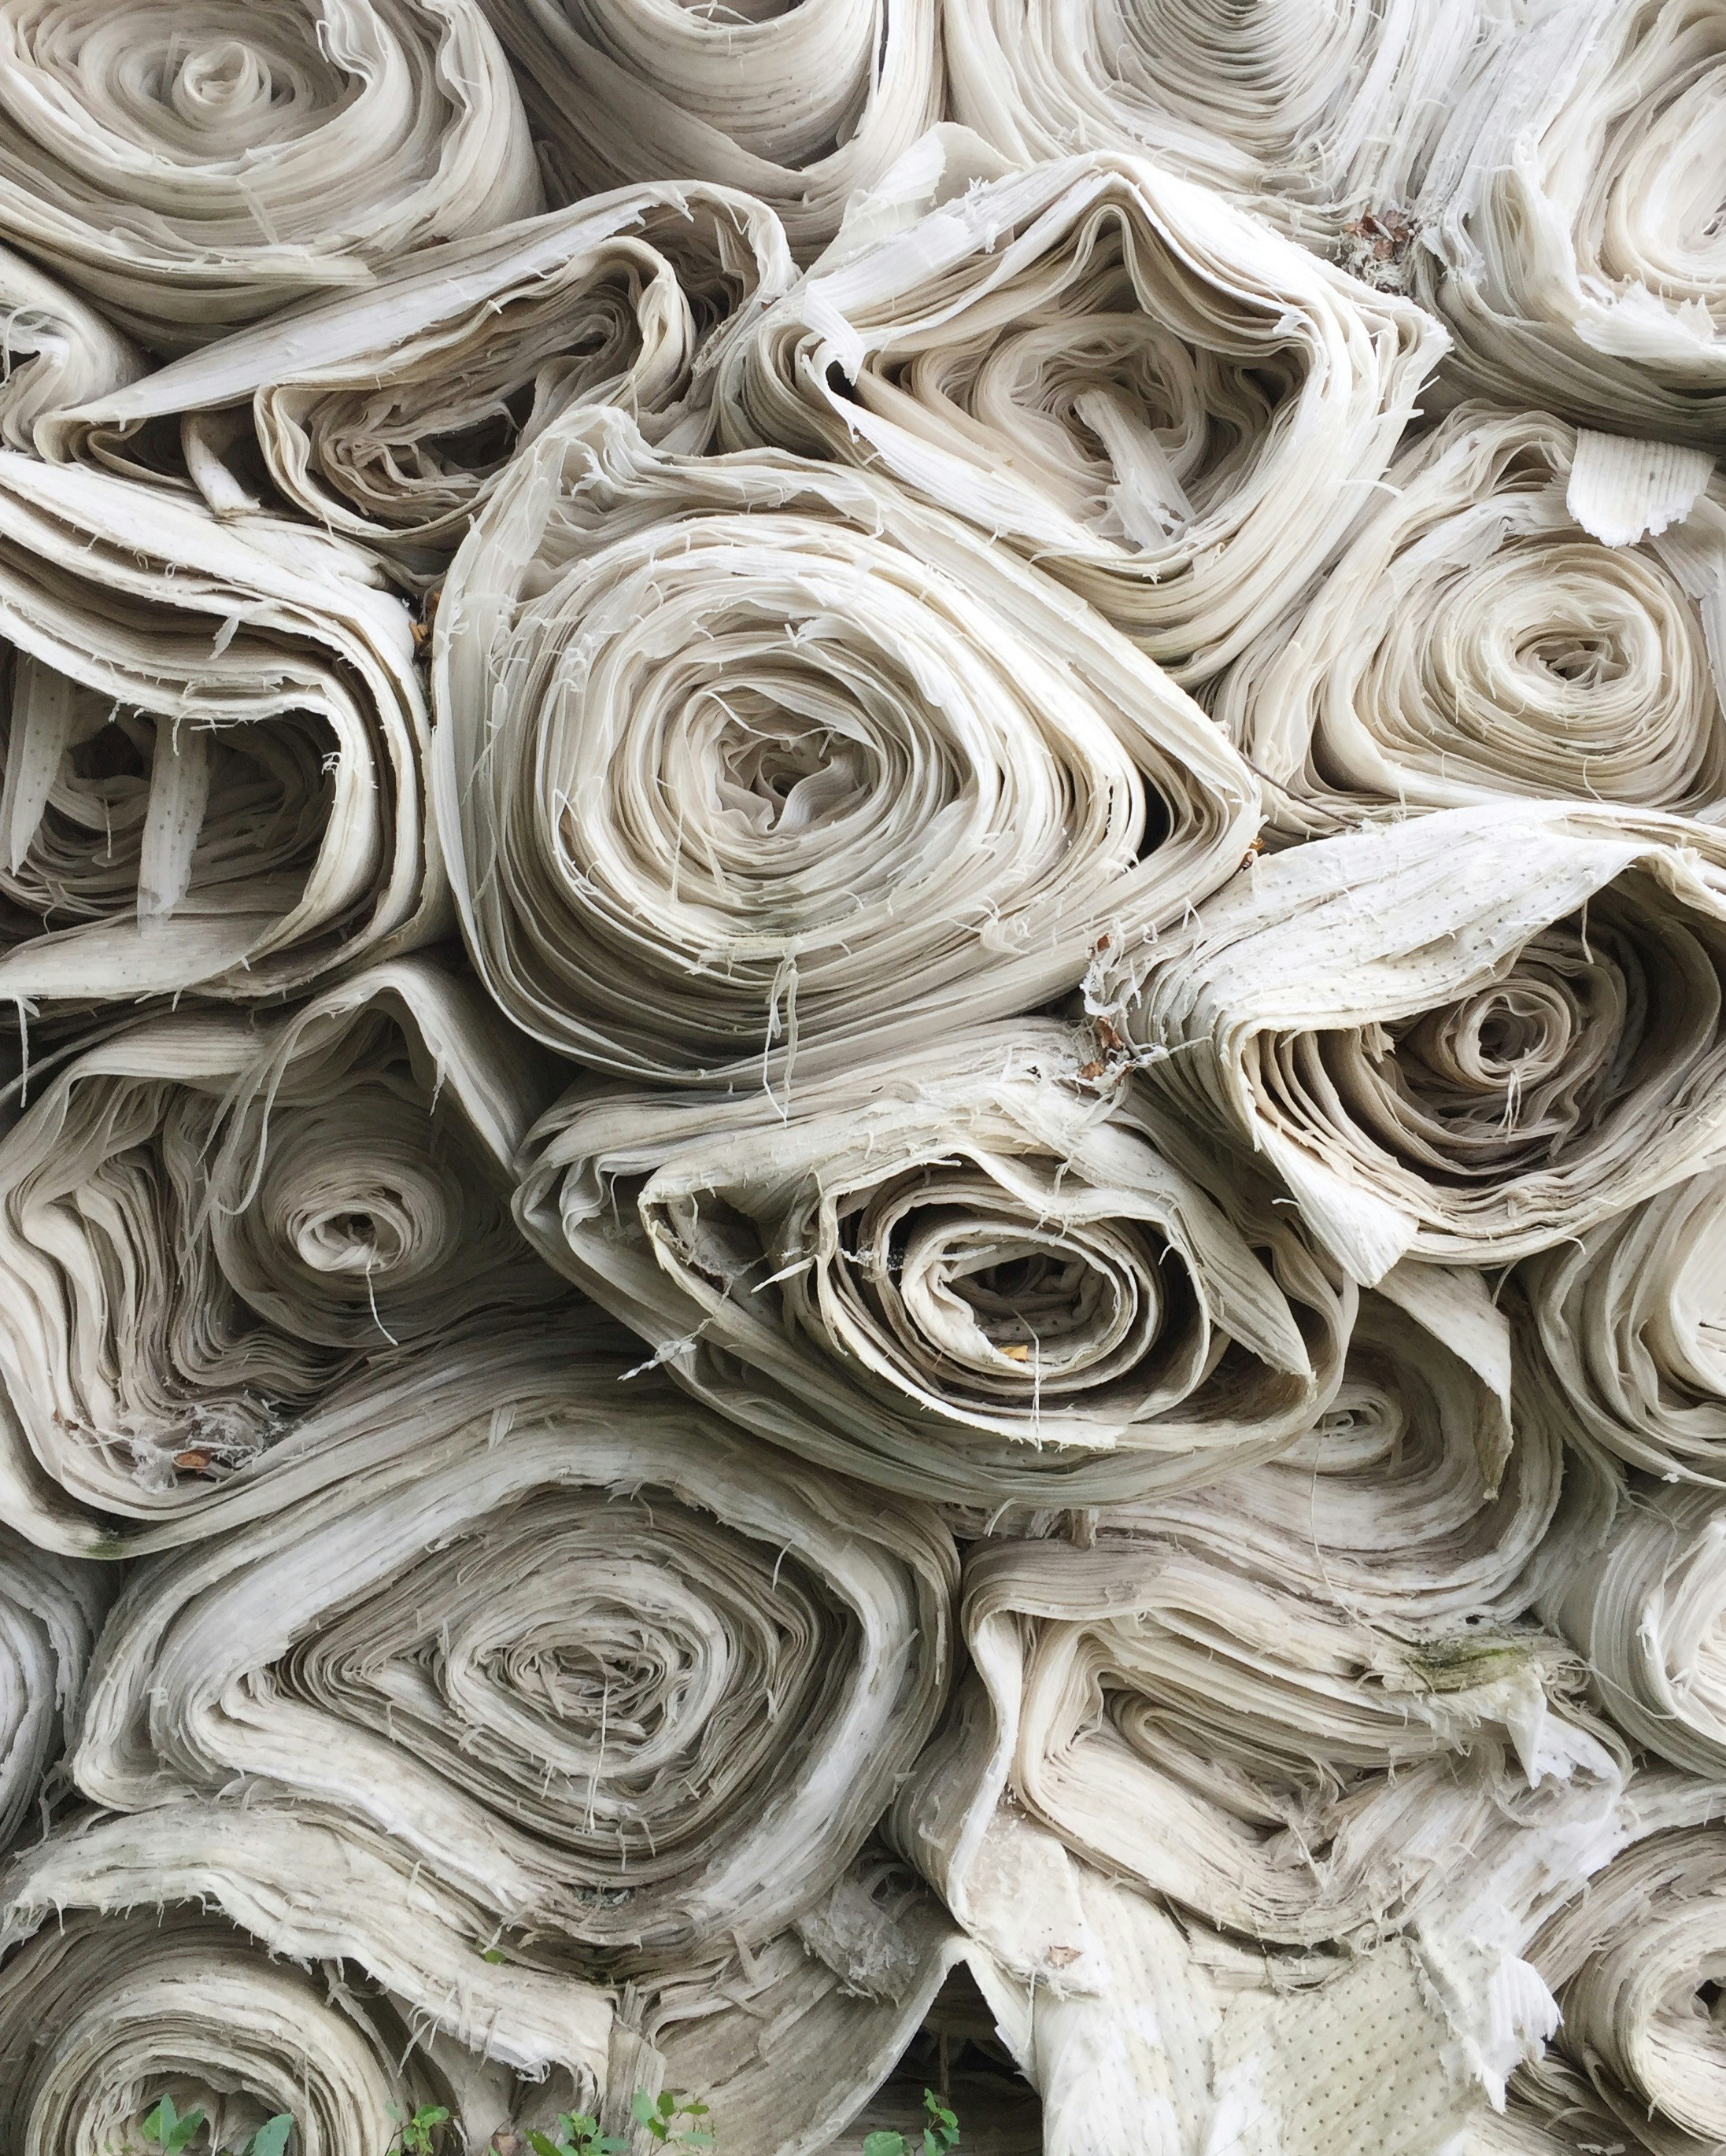 Large rolls of white fabric stacked on top of each other.